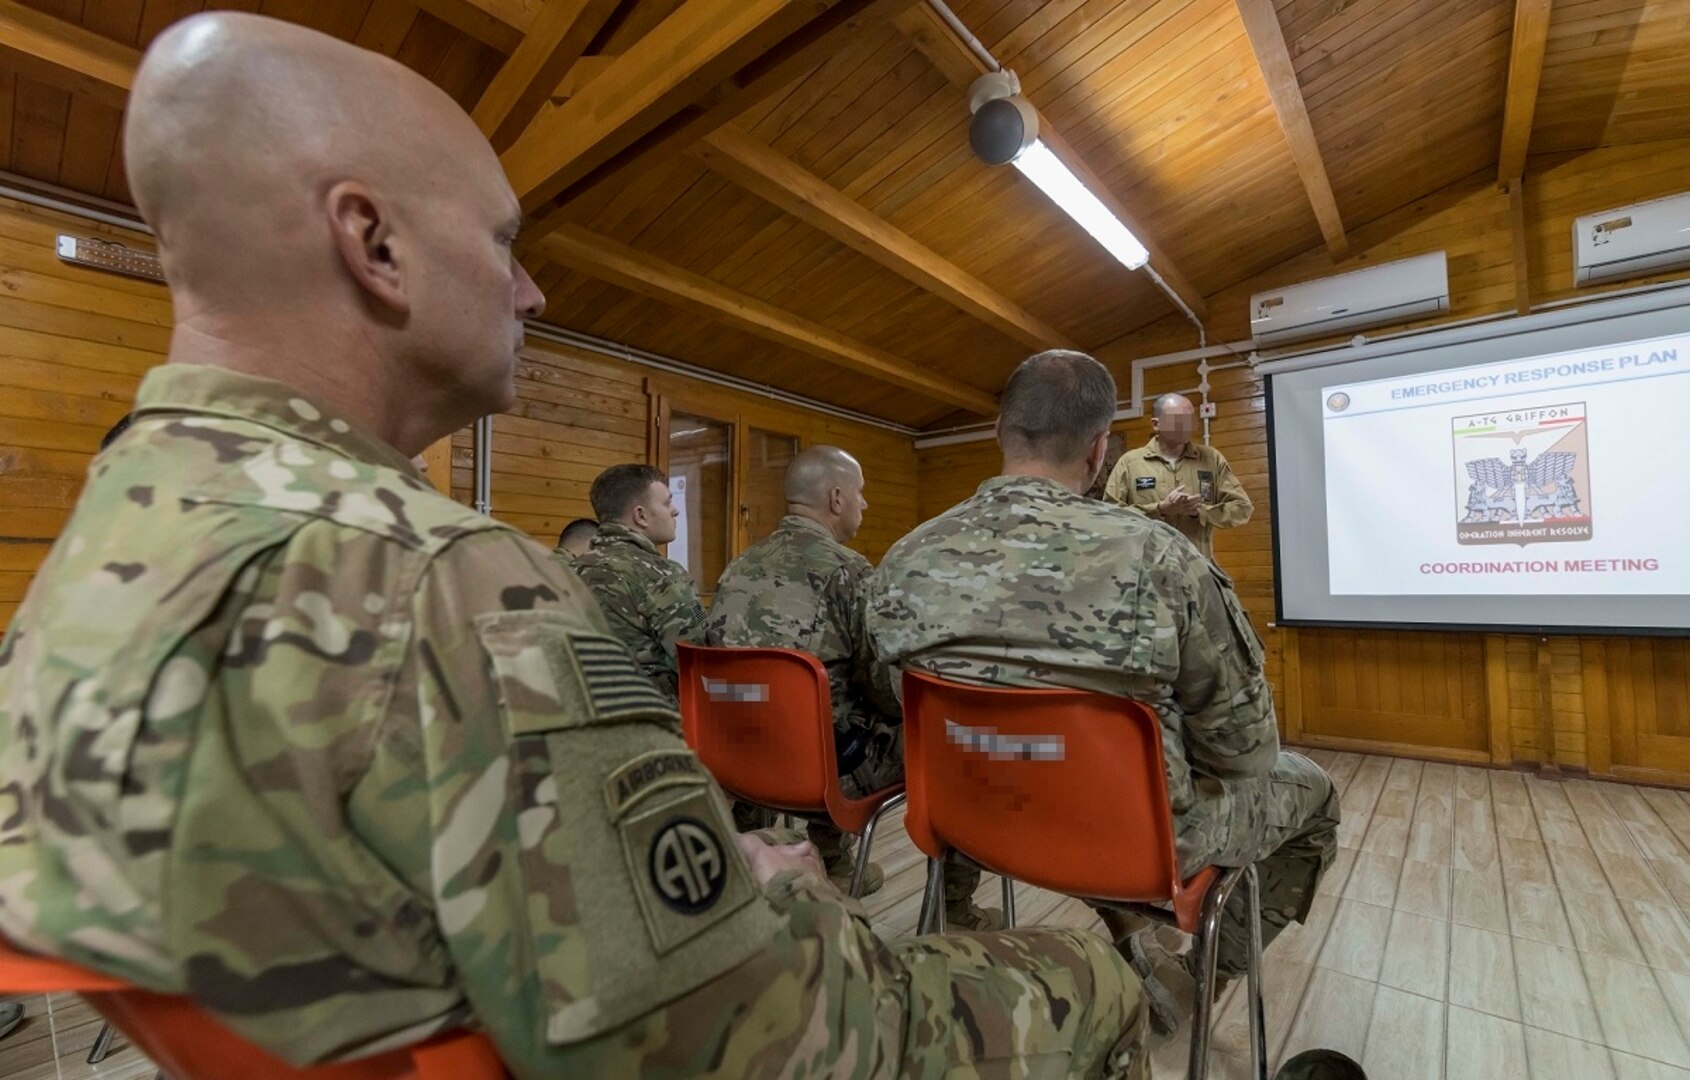 Pilots and technicians attached to Combined Joint Task Force - Operation Inherent Resolve from Italian Air Task Group "Griffon" and the U.S. Task Force "Gunfighter" met to improve Coalition flight procedures. The main objective was to develop a plan for responding to in-flight emergencies and to discuss possible scenarios during which constant procedural and operational synergy is essential.